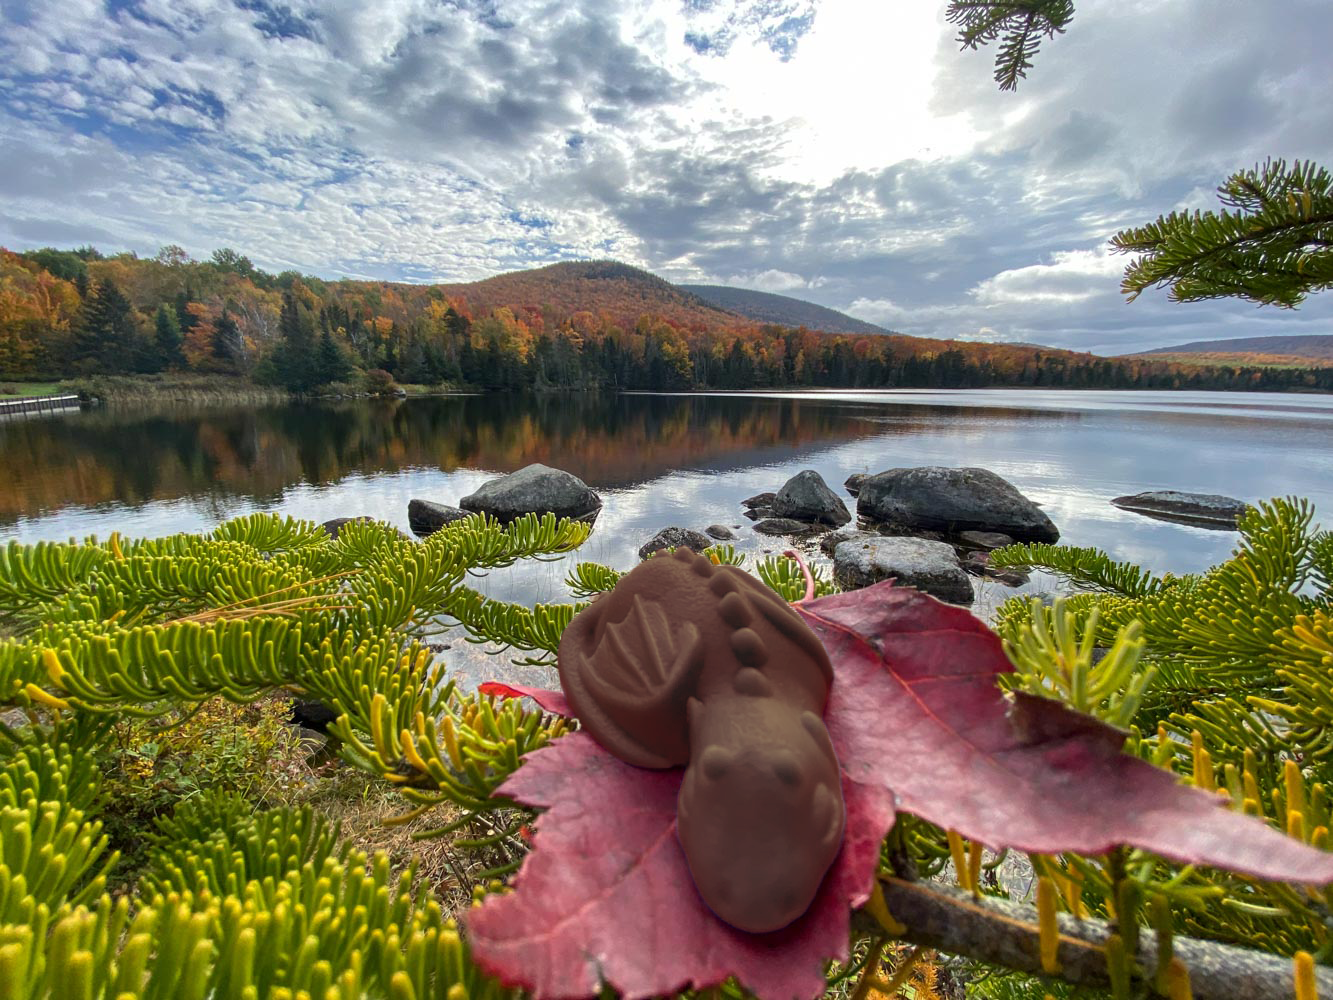 A landscape with a lake and mountains and a dragon-shaped chocolate on a leaf